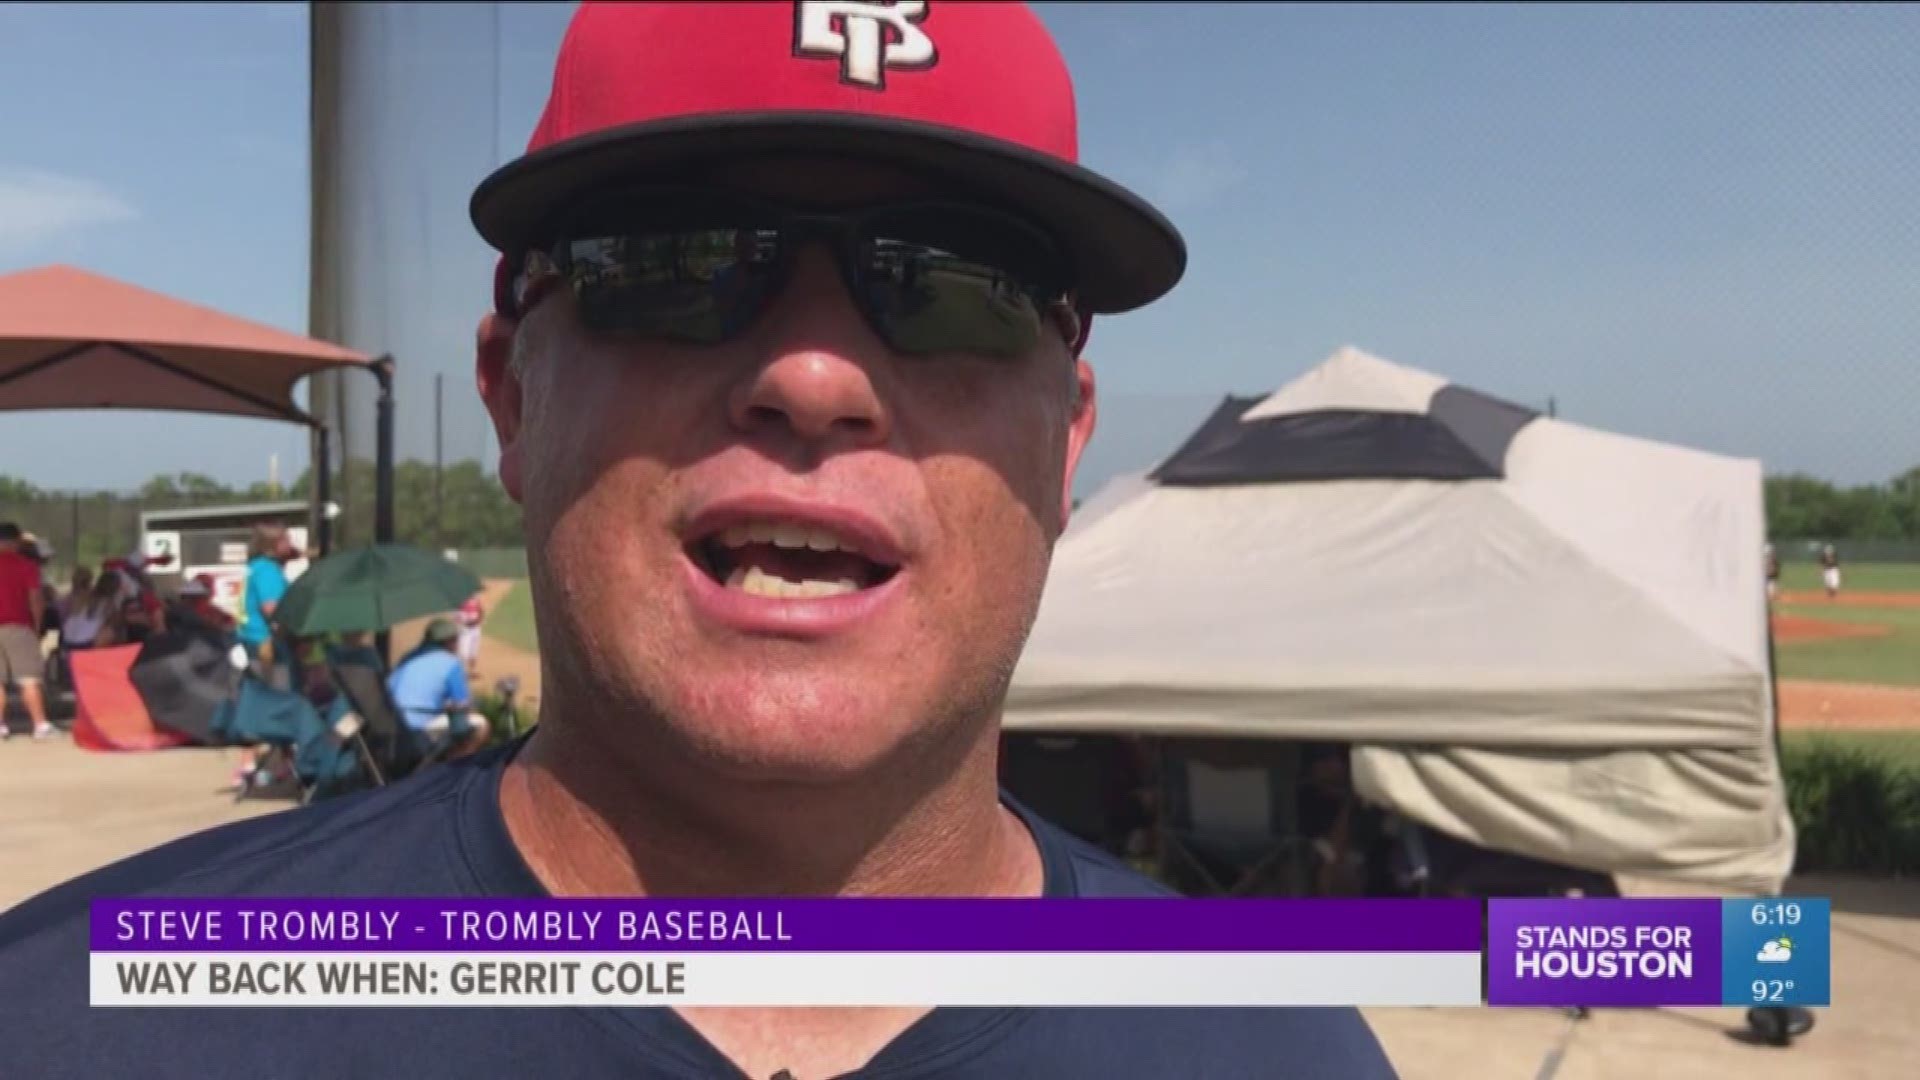 What was Astros star pitcher Gerrit Cole like when he was younger? KHOU 11 Sports' Jason Bristol caught up with Steve Trombley this week to find out.